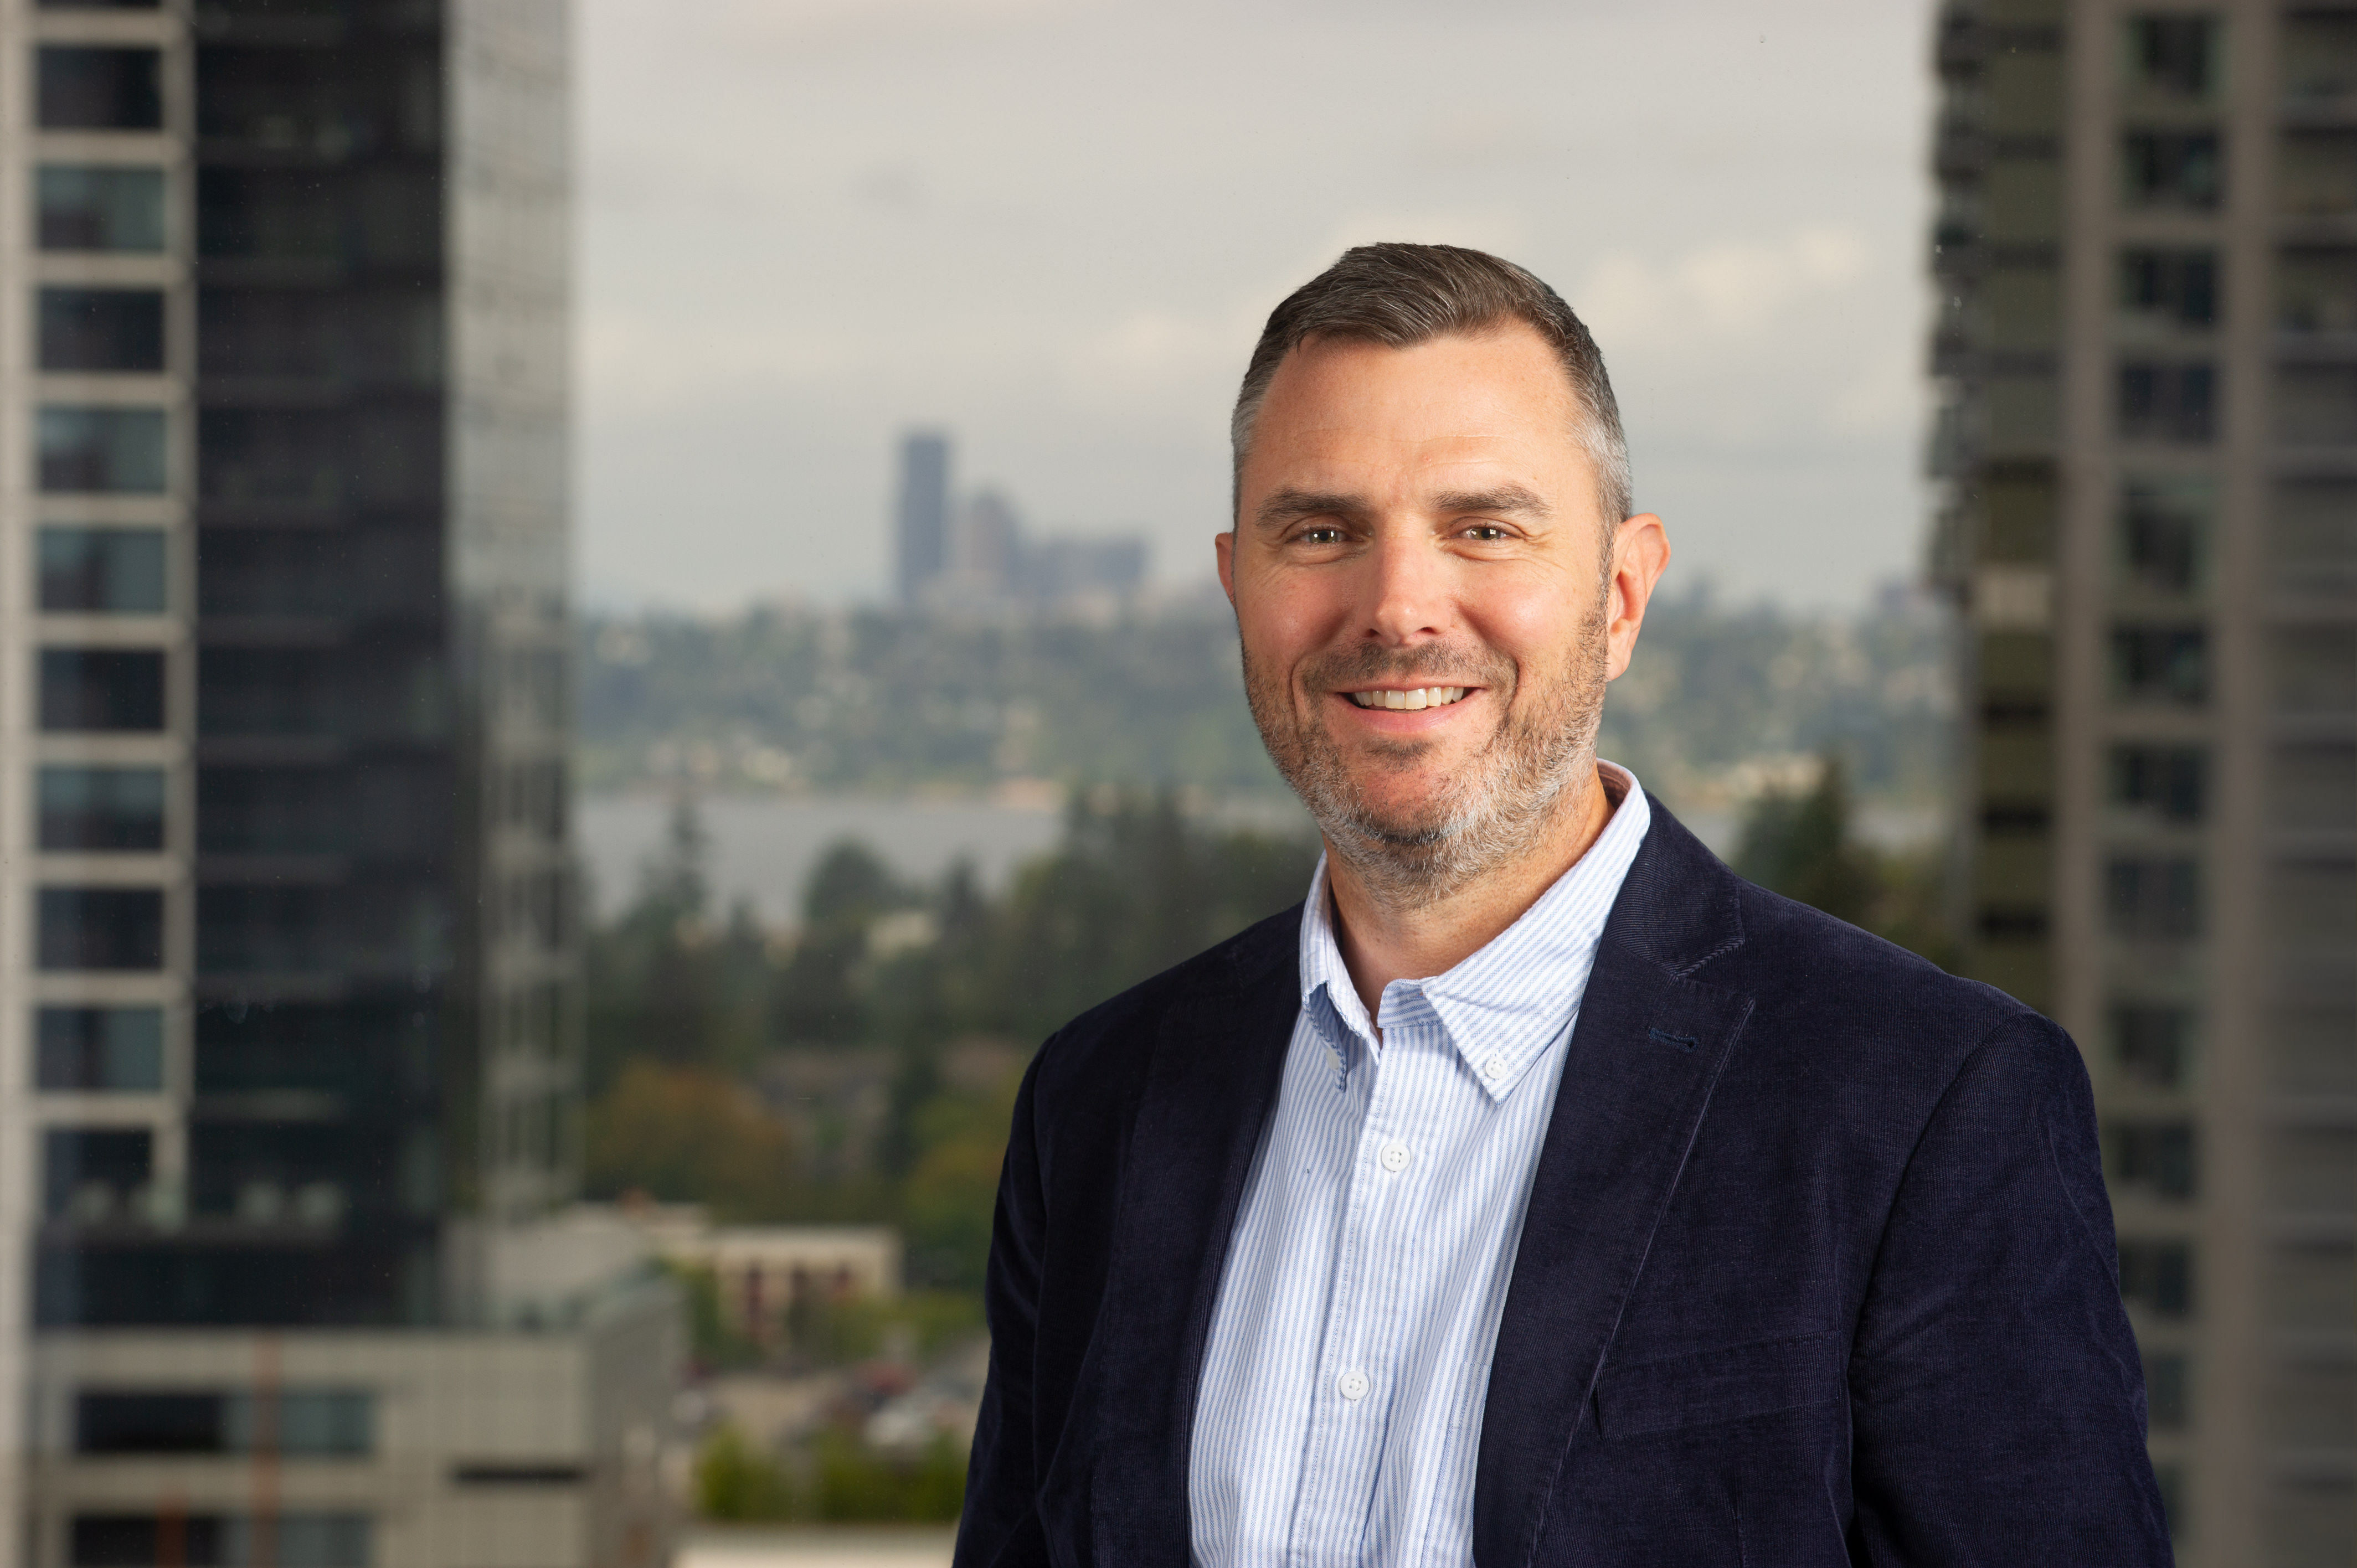 Eric Lonergan joins global commercial real estate advisory services firm Savills as executive managing director and co-market leader in the Seattle office.